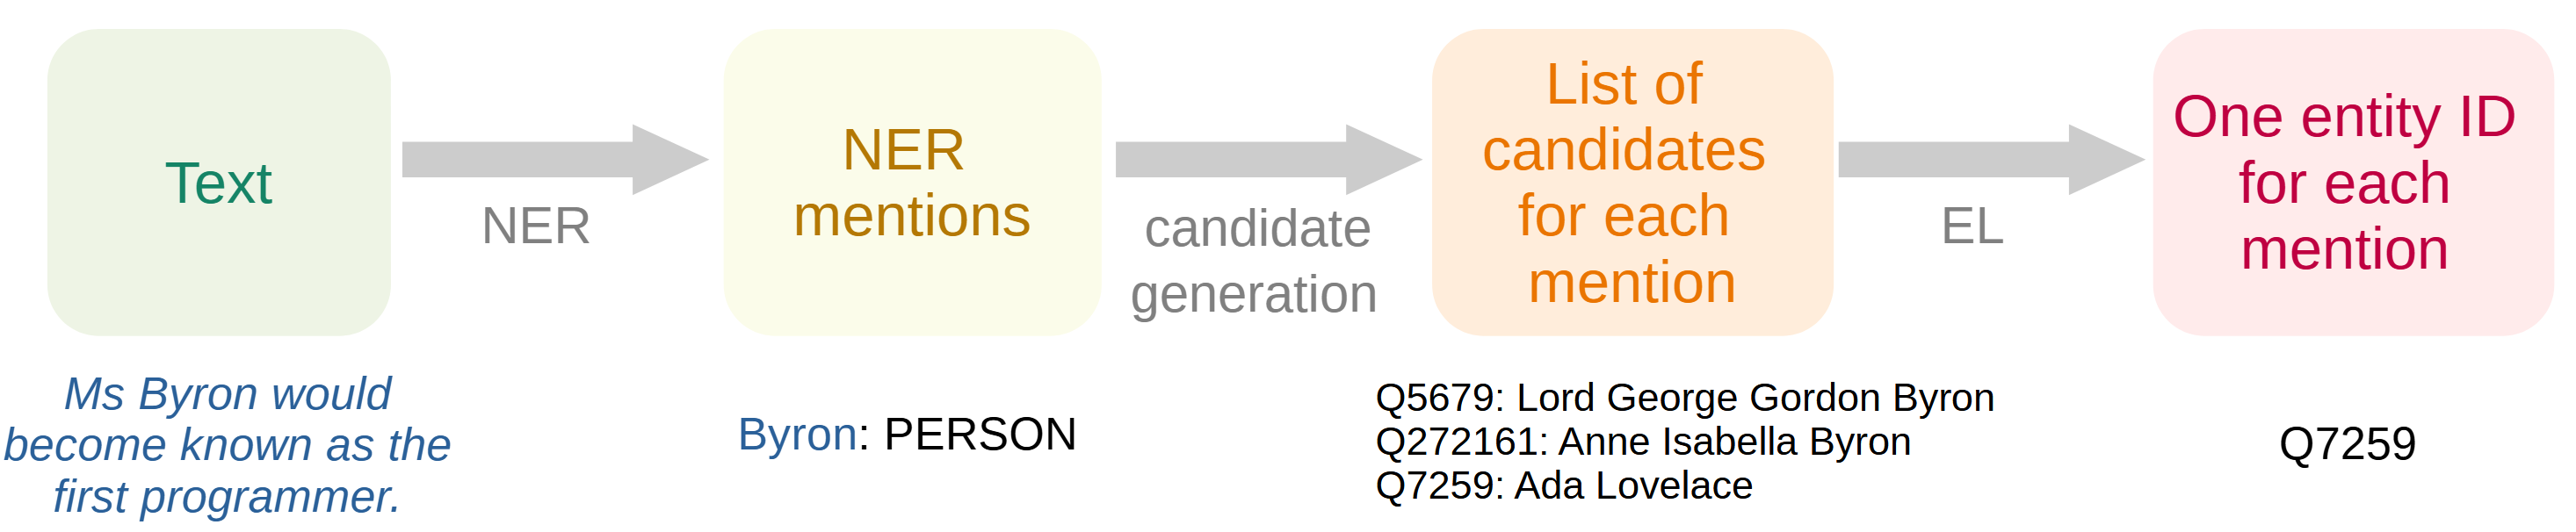 Flowchart showing the required steps in the pipeline: First NER, then candidate generation, then Entity Linking (EL)